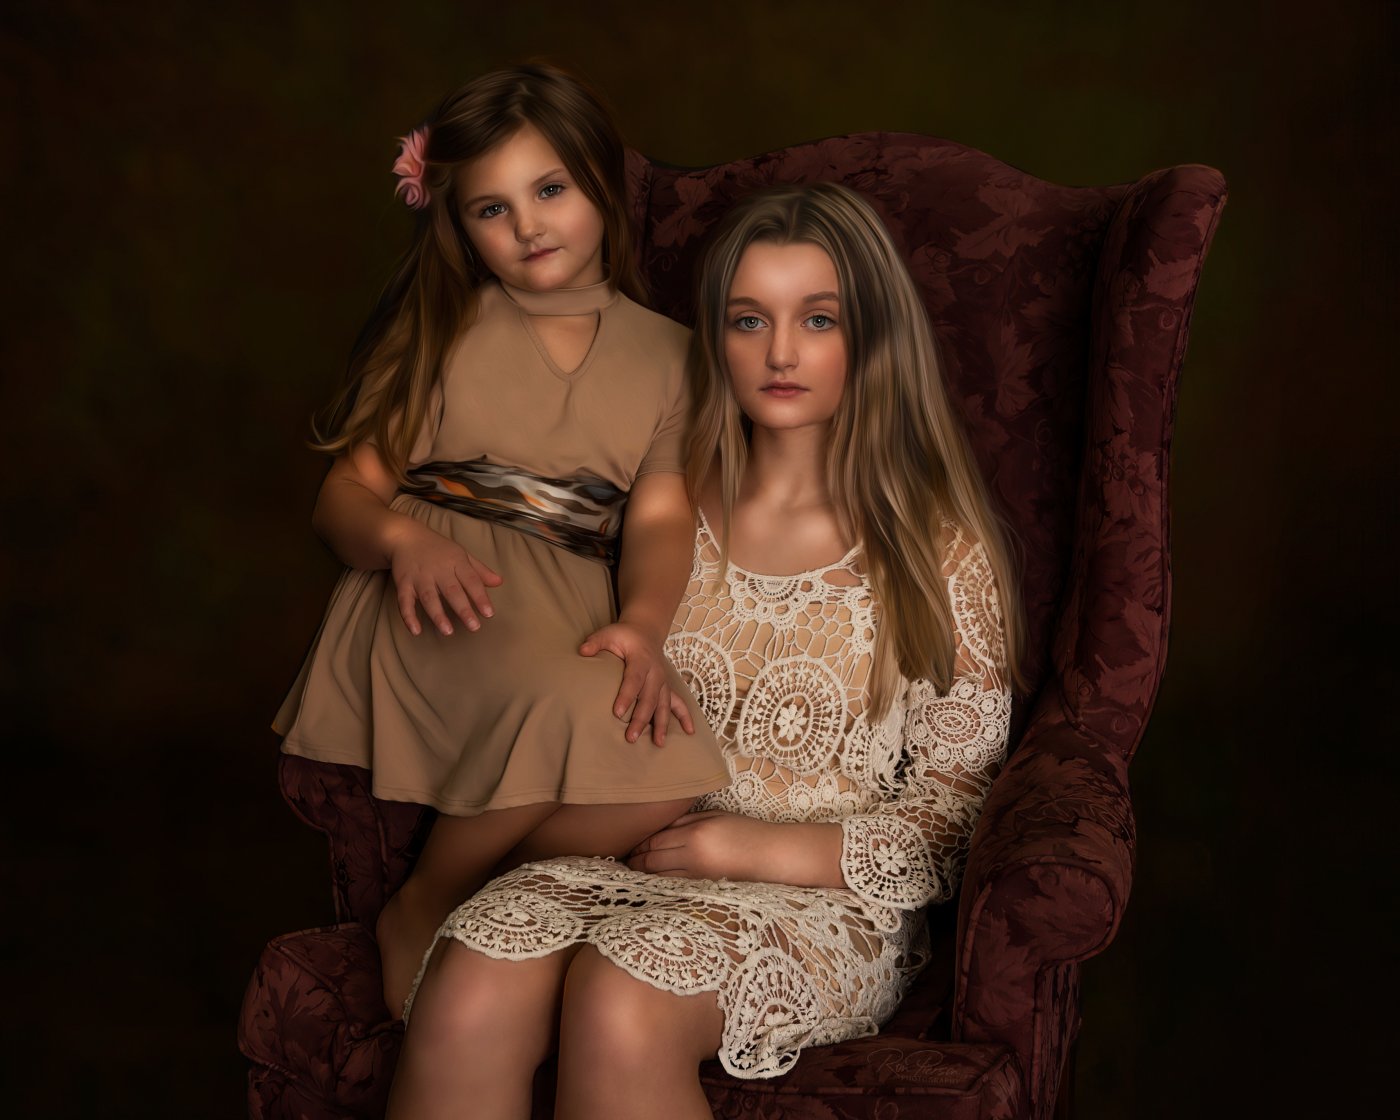 emily-and-hailey-fine-art-photo-portrait-at-ron-pierson-photography-crop.jpg